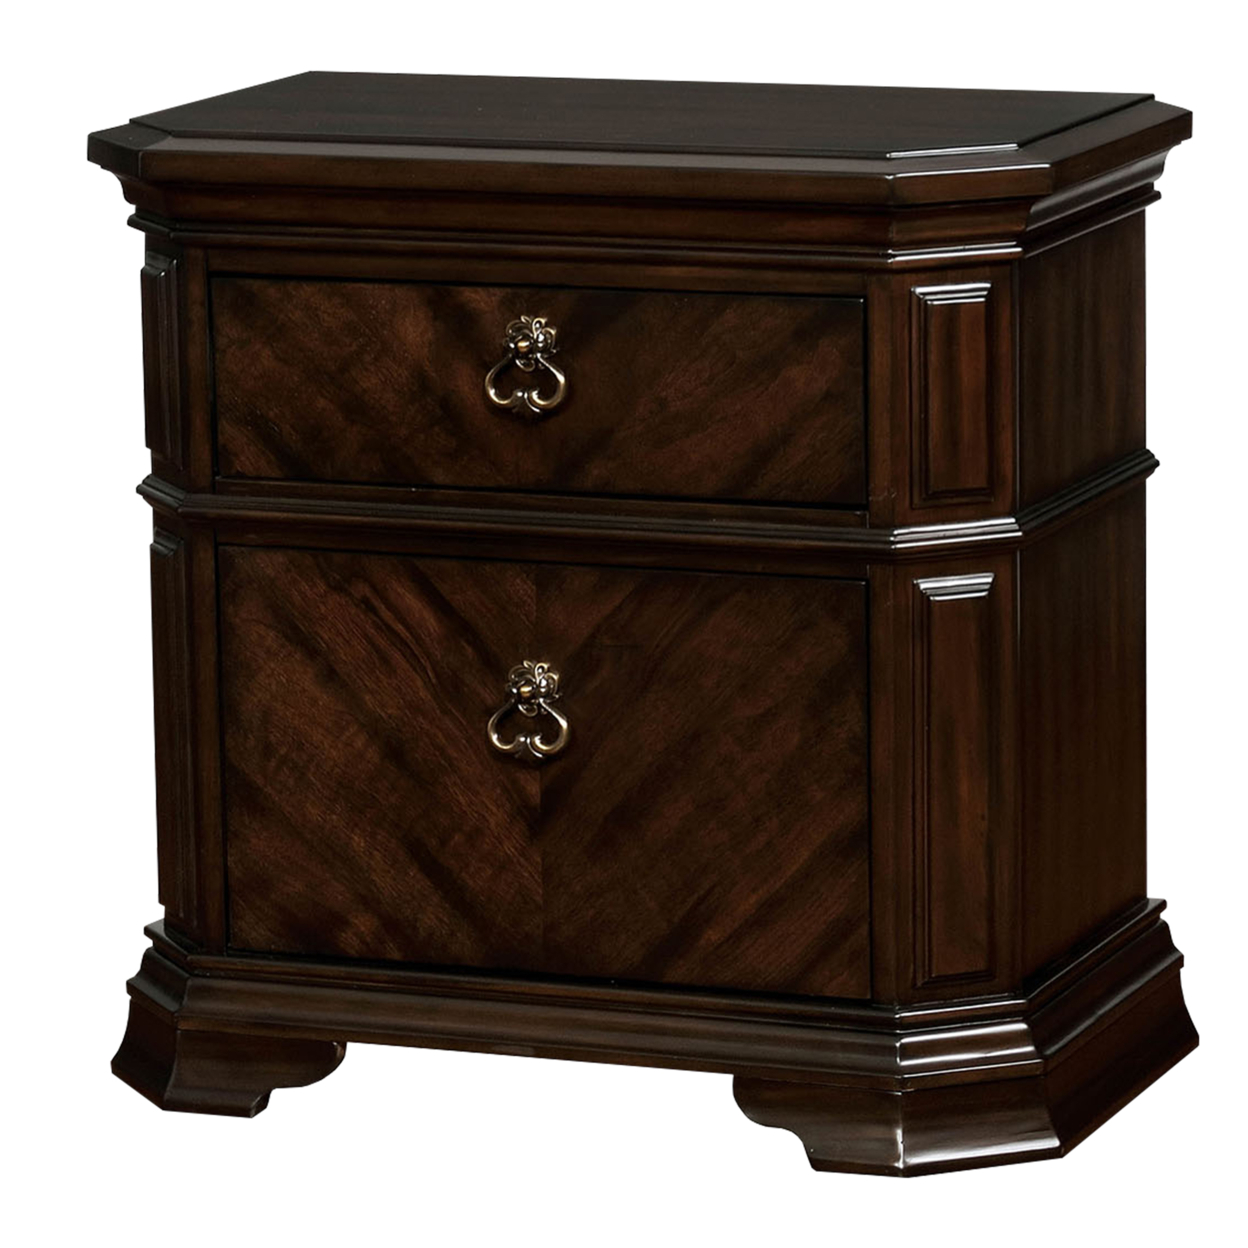 Two Drawer Solid Wood Nightstand With Clipped Corner, Espresso Brown- Saltoro Sherpi